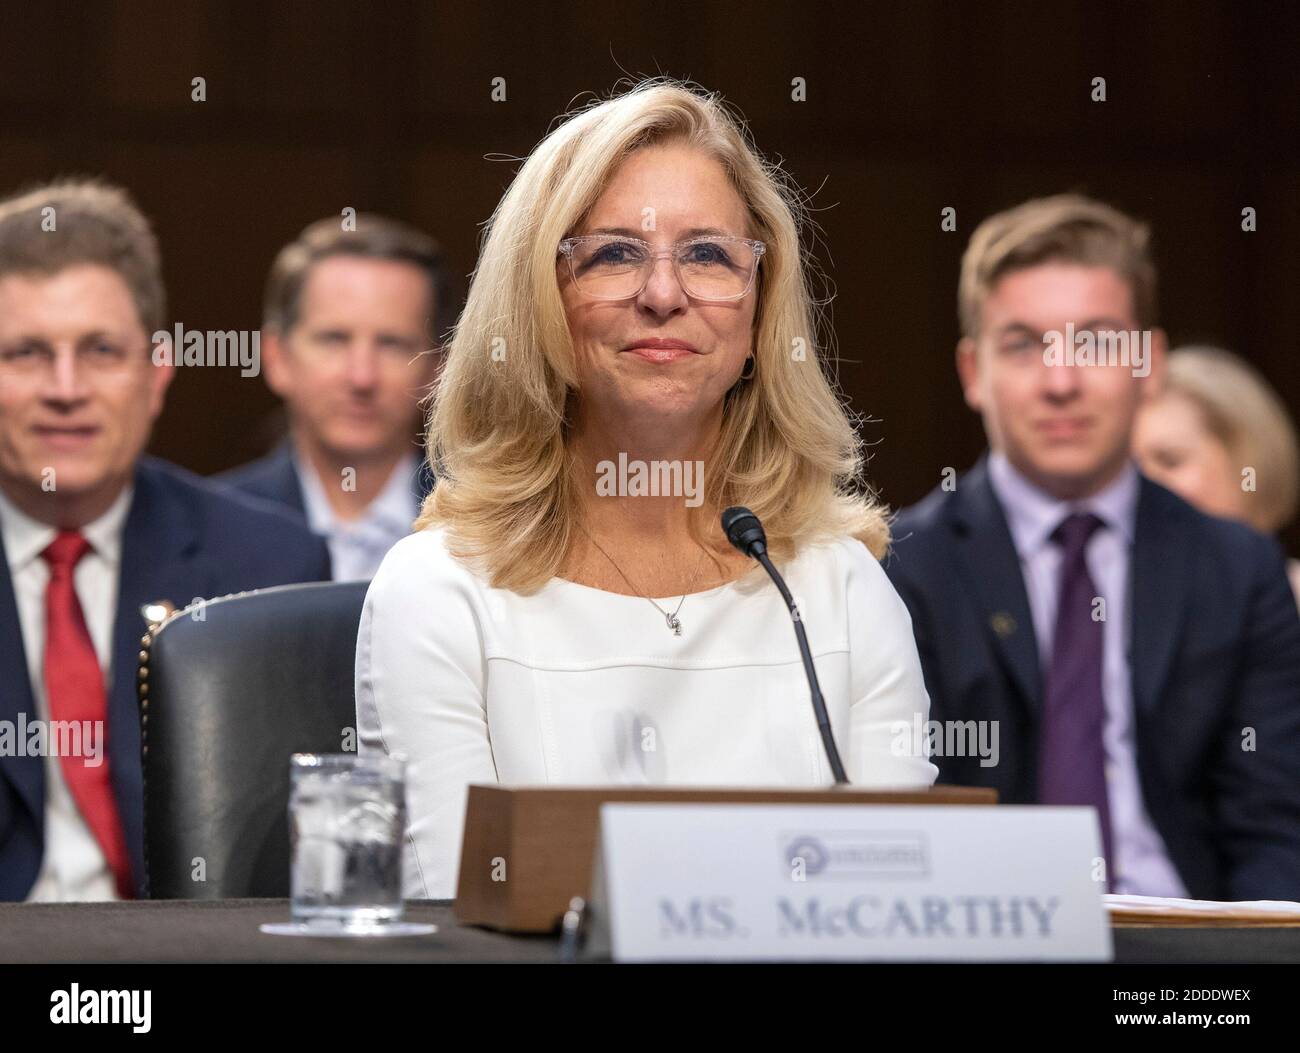 Ellen E. McCarthy testifies before the United States Senate Select Committee on Intelligence on her nomination to be an Assistant Secretary of State (Intelligence and Research), on Capitol Hill in Washington, DC, USA, on Wednesday, July 25, 2018. Photo by Ron Sachs/CNP/ABACAPRESS.COM Stock Photo